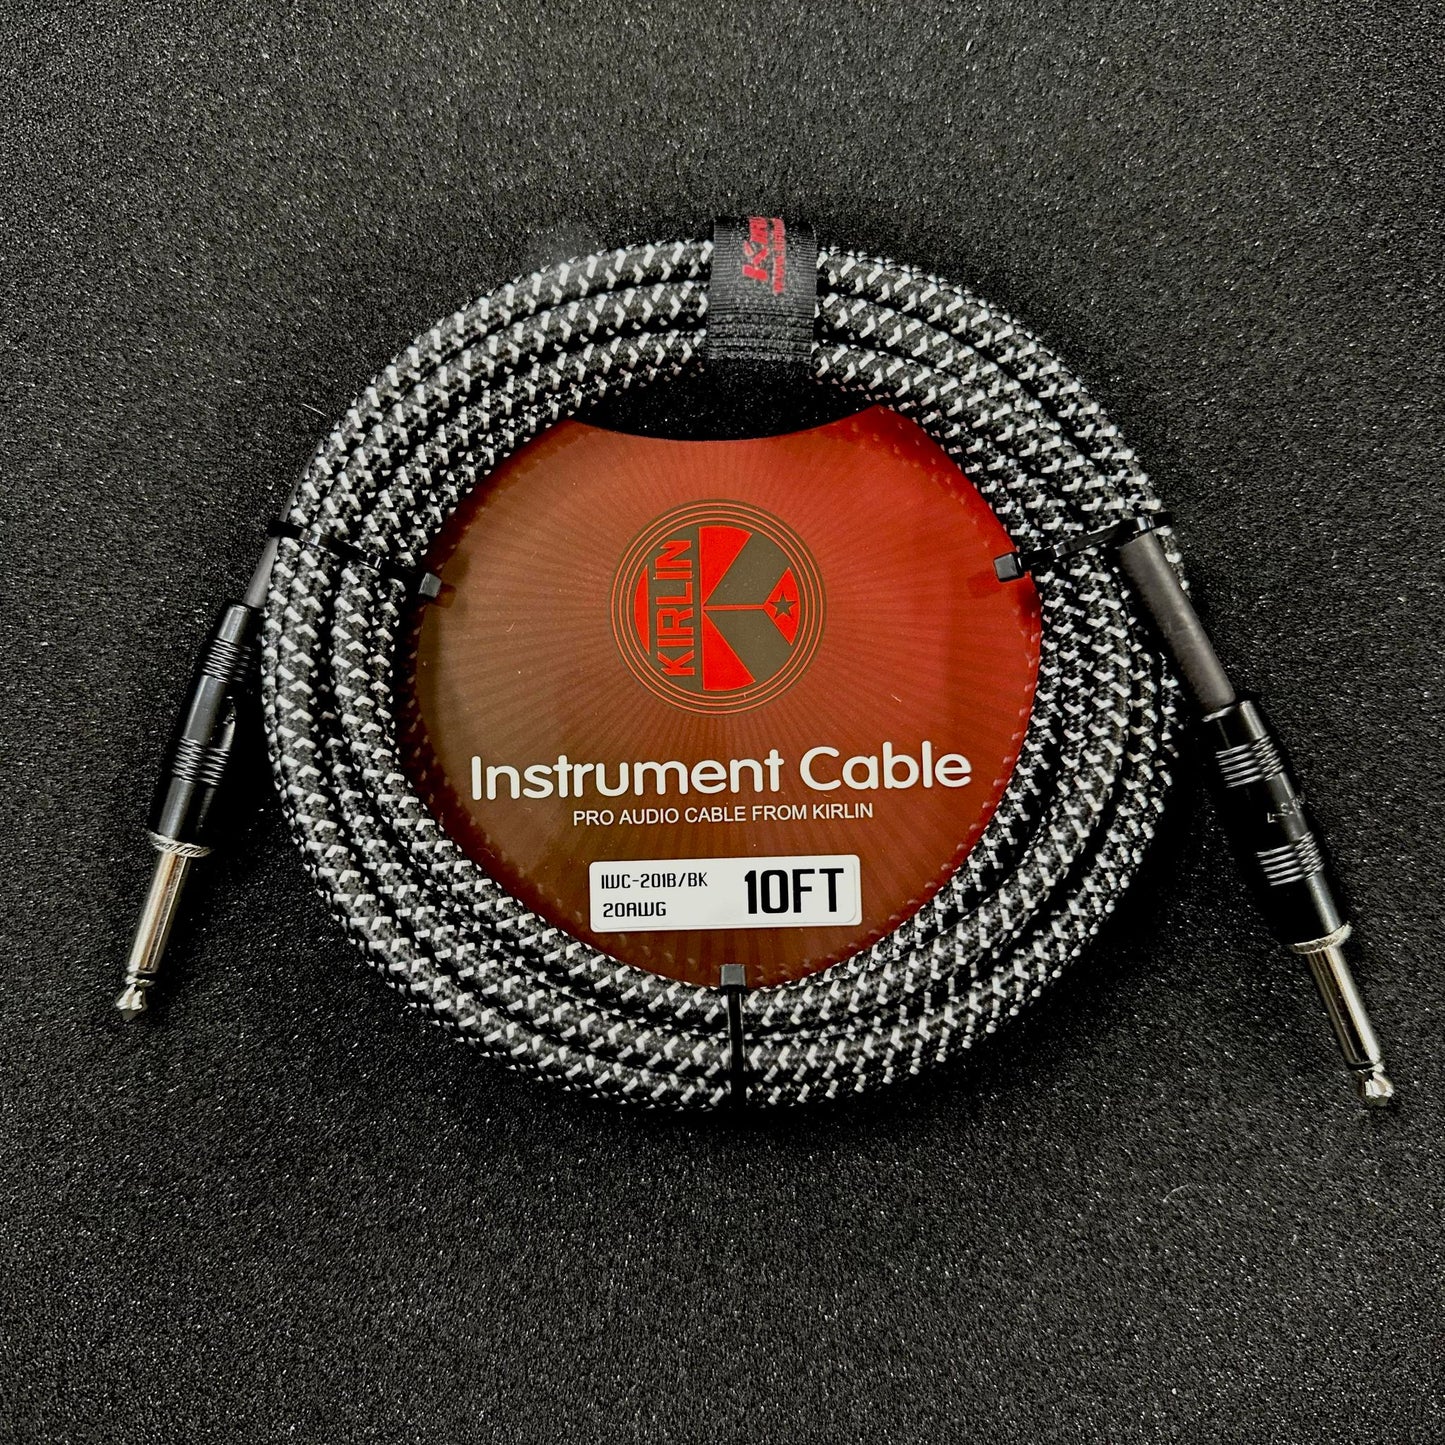 Kirlin 10ft Woven Instrument Cable